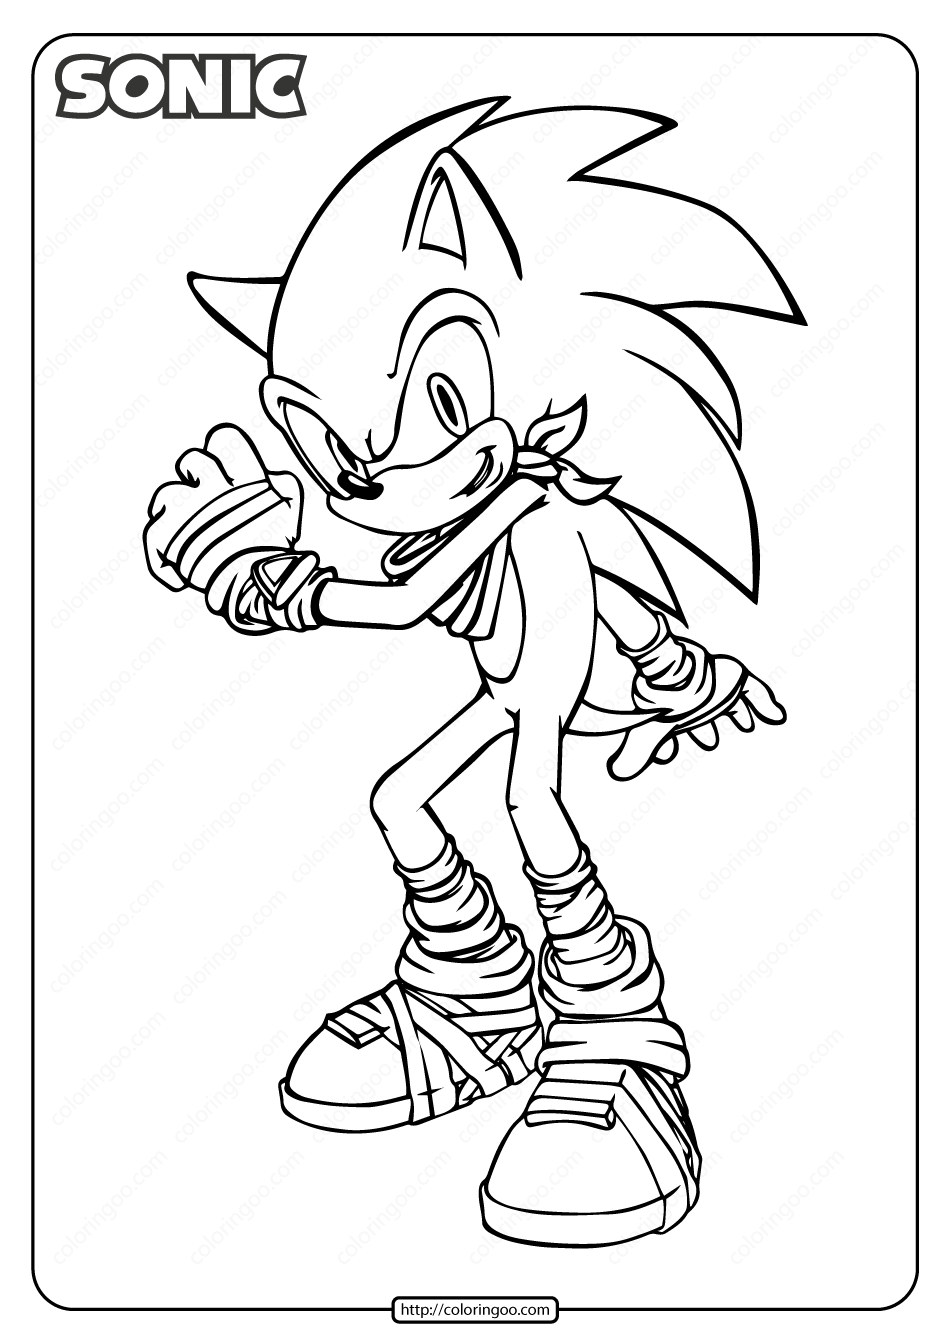 Free Printable Sonic Pdf Coloring Page | Cartoon Coloring Pages, Super  Coloring Pages, Coloring Pages - Coloring Home